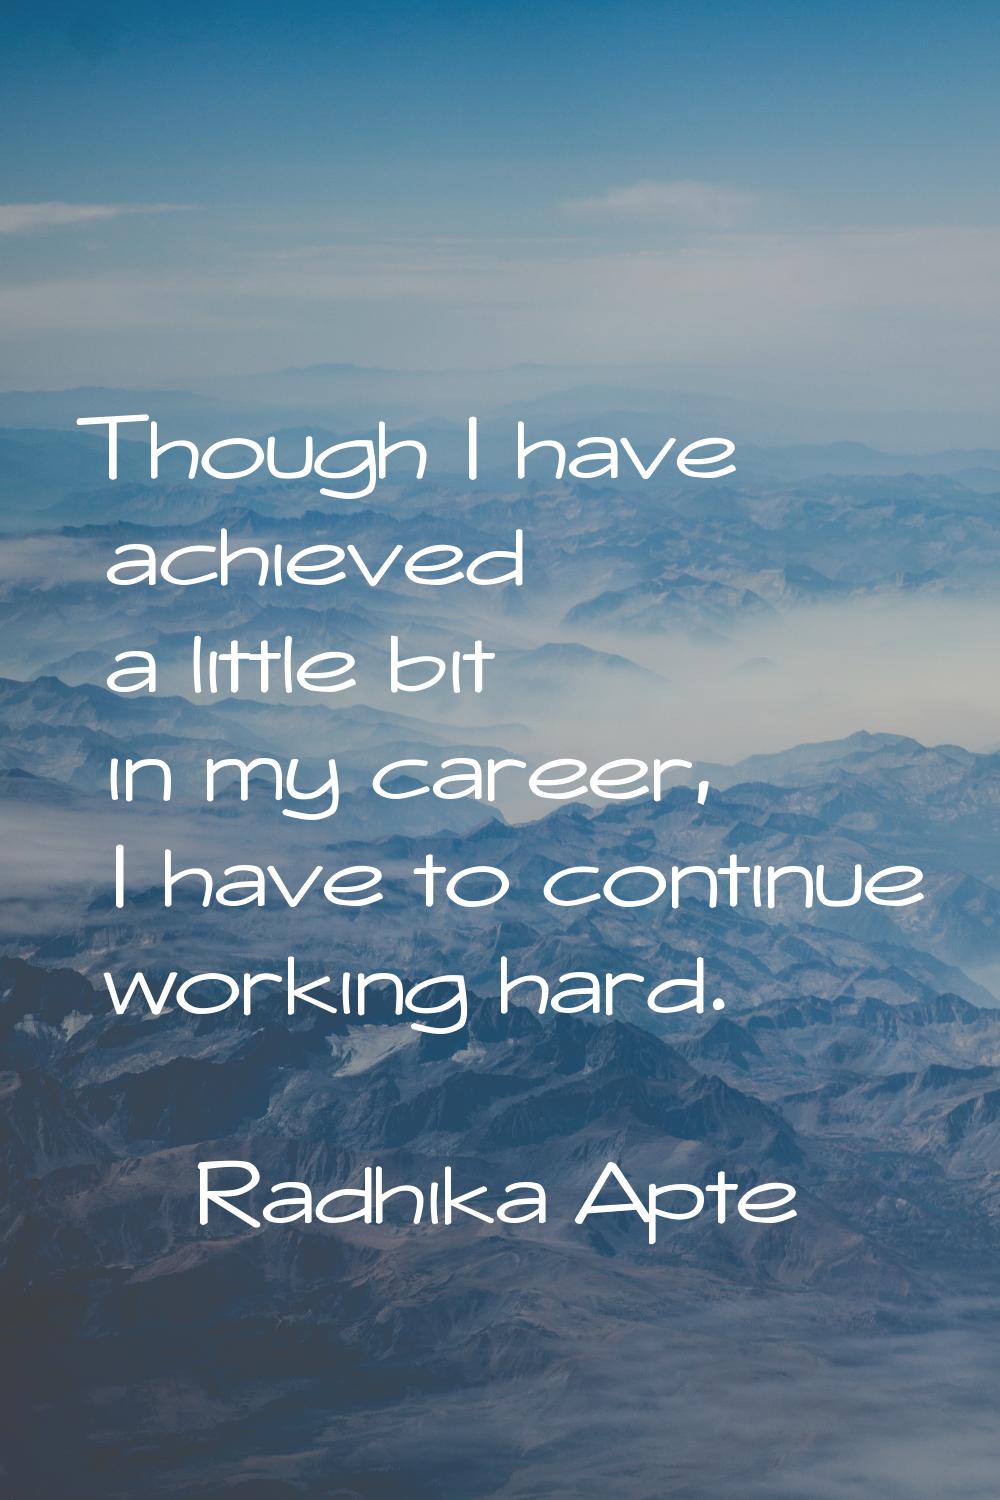 Though I have achieved a little bit in my career, I have to continue working hard.